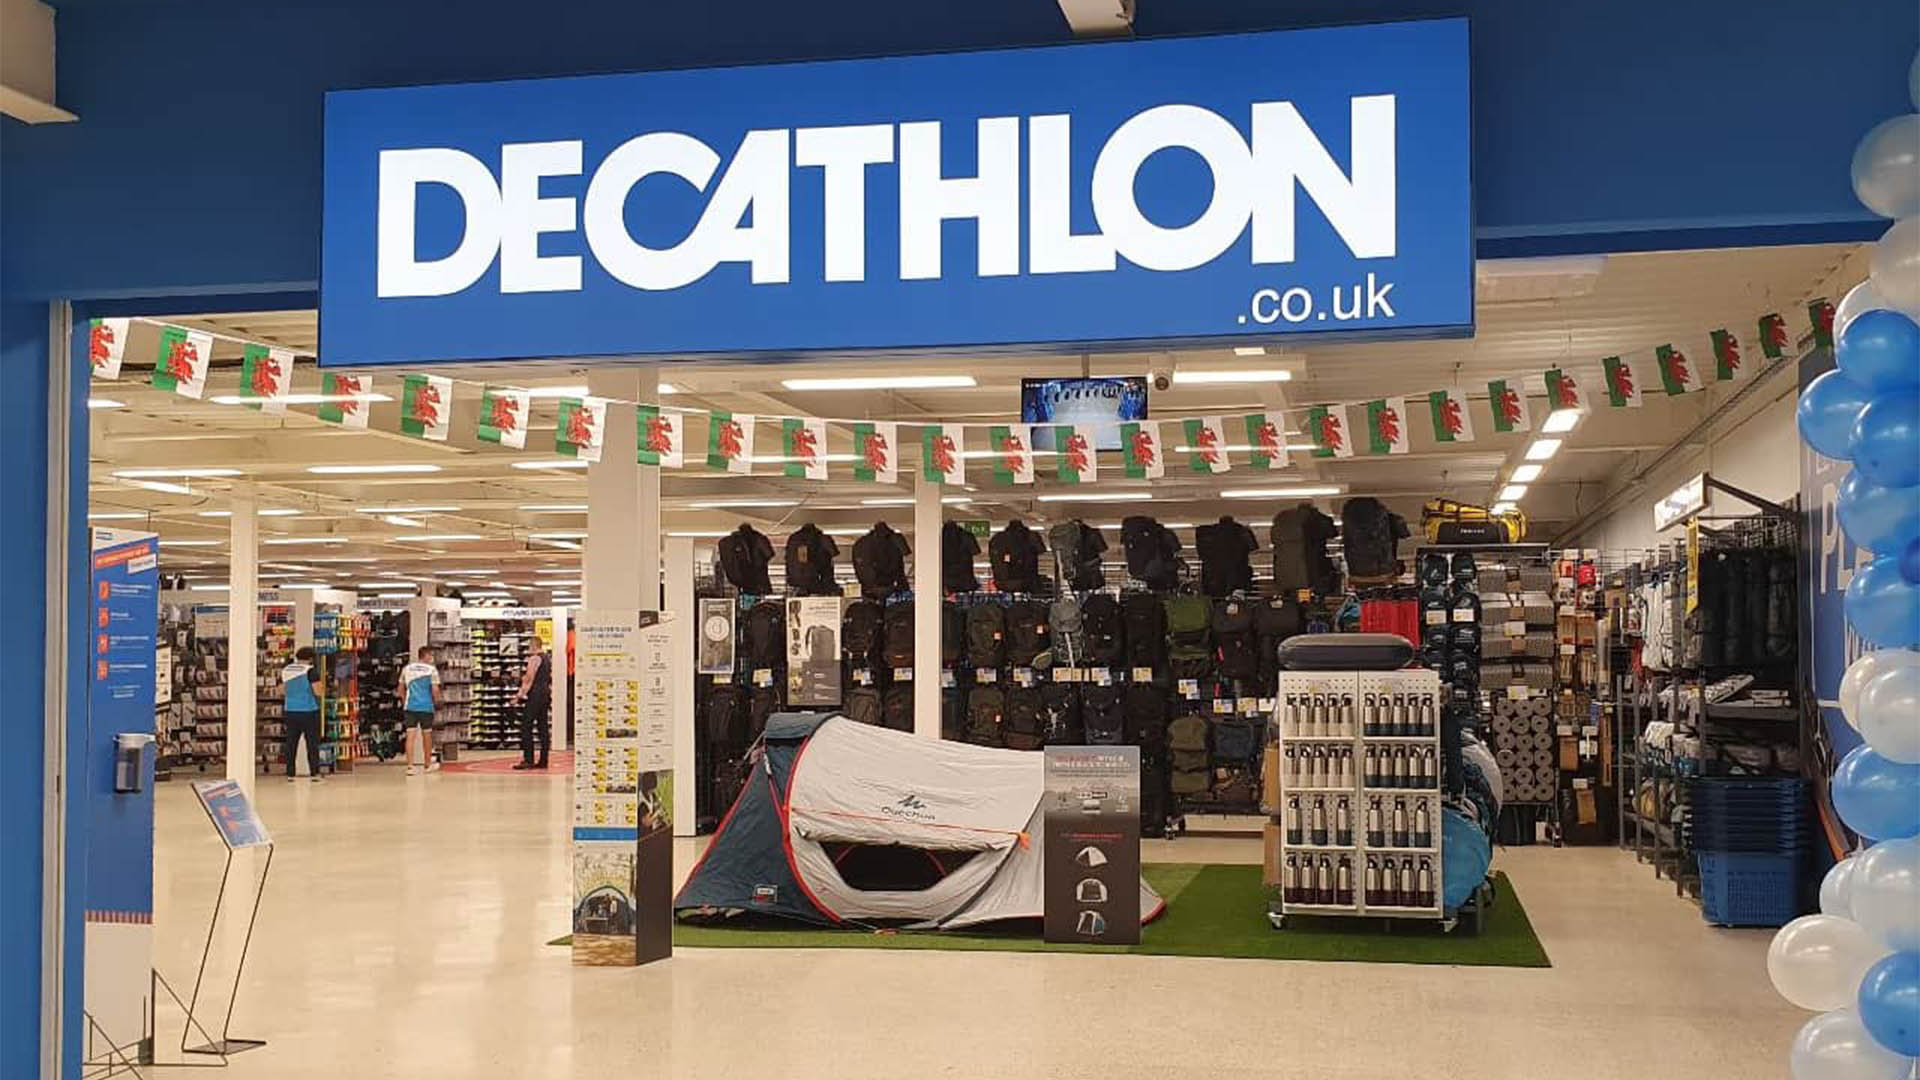 Decathlon launches rental service to make sports more affordable